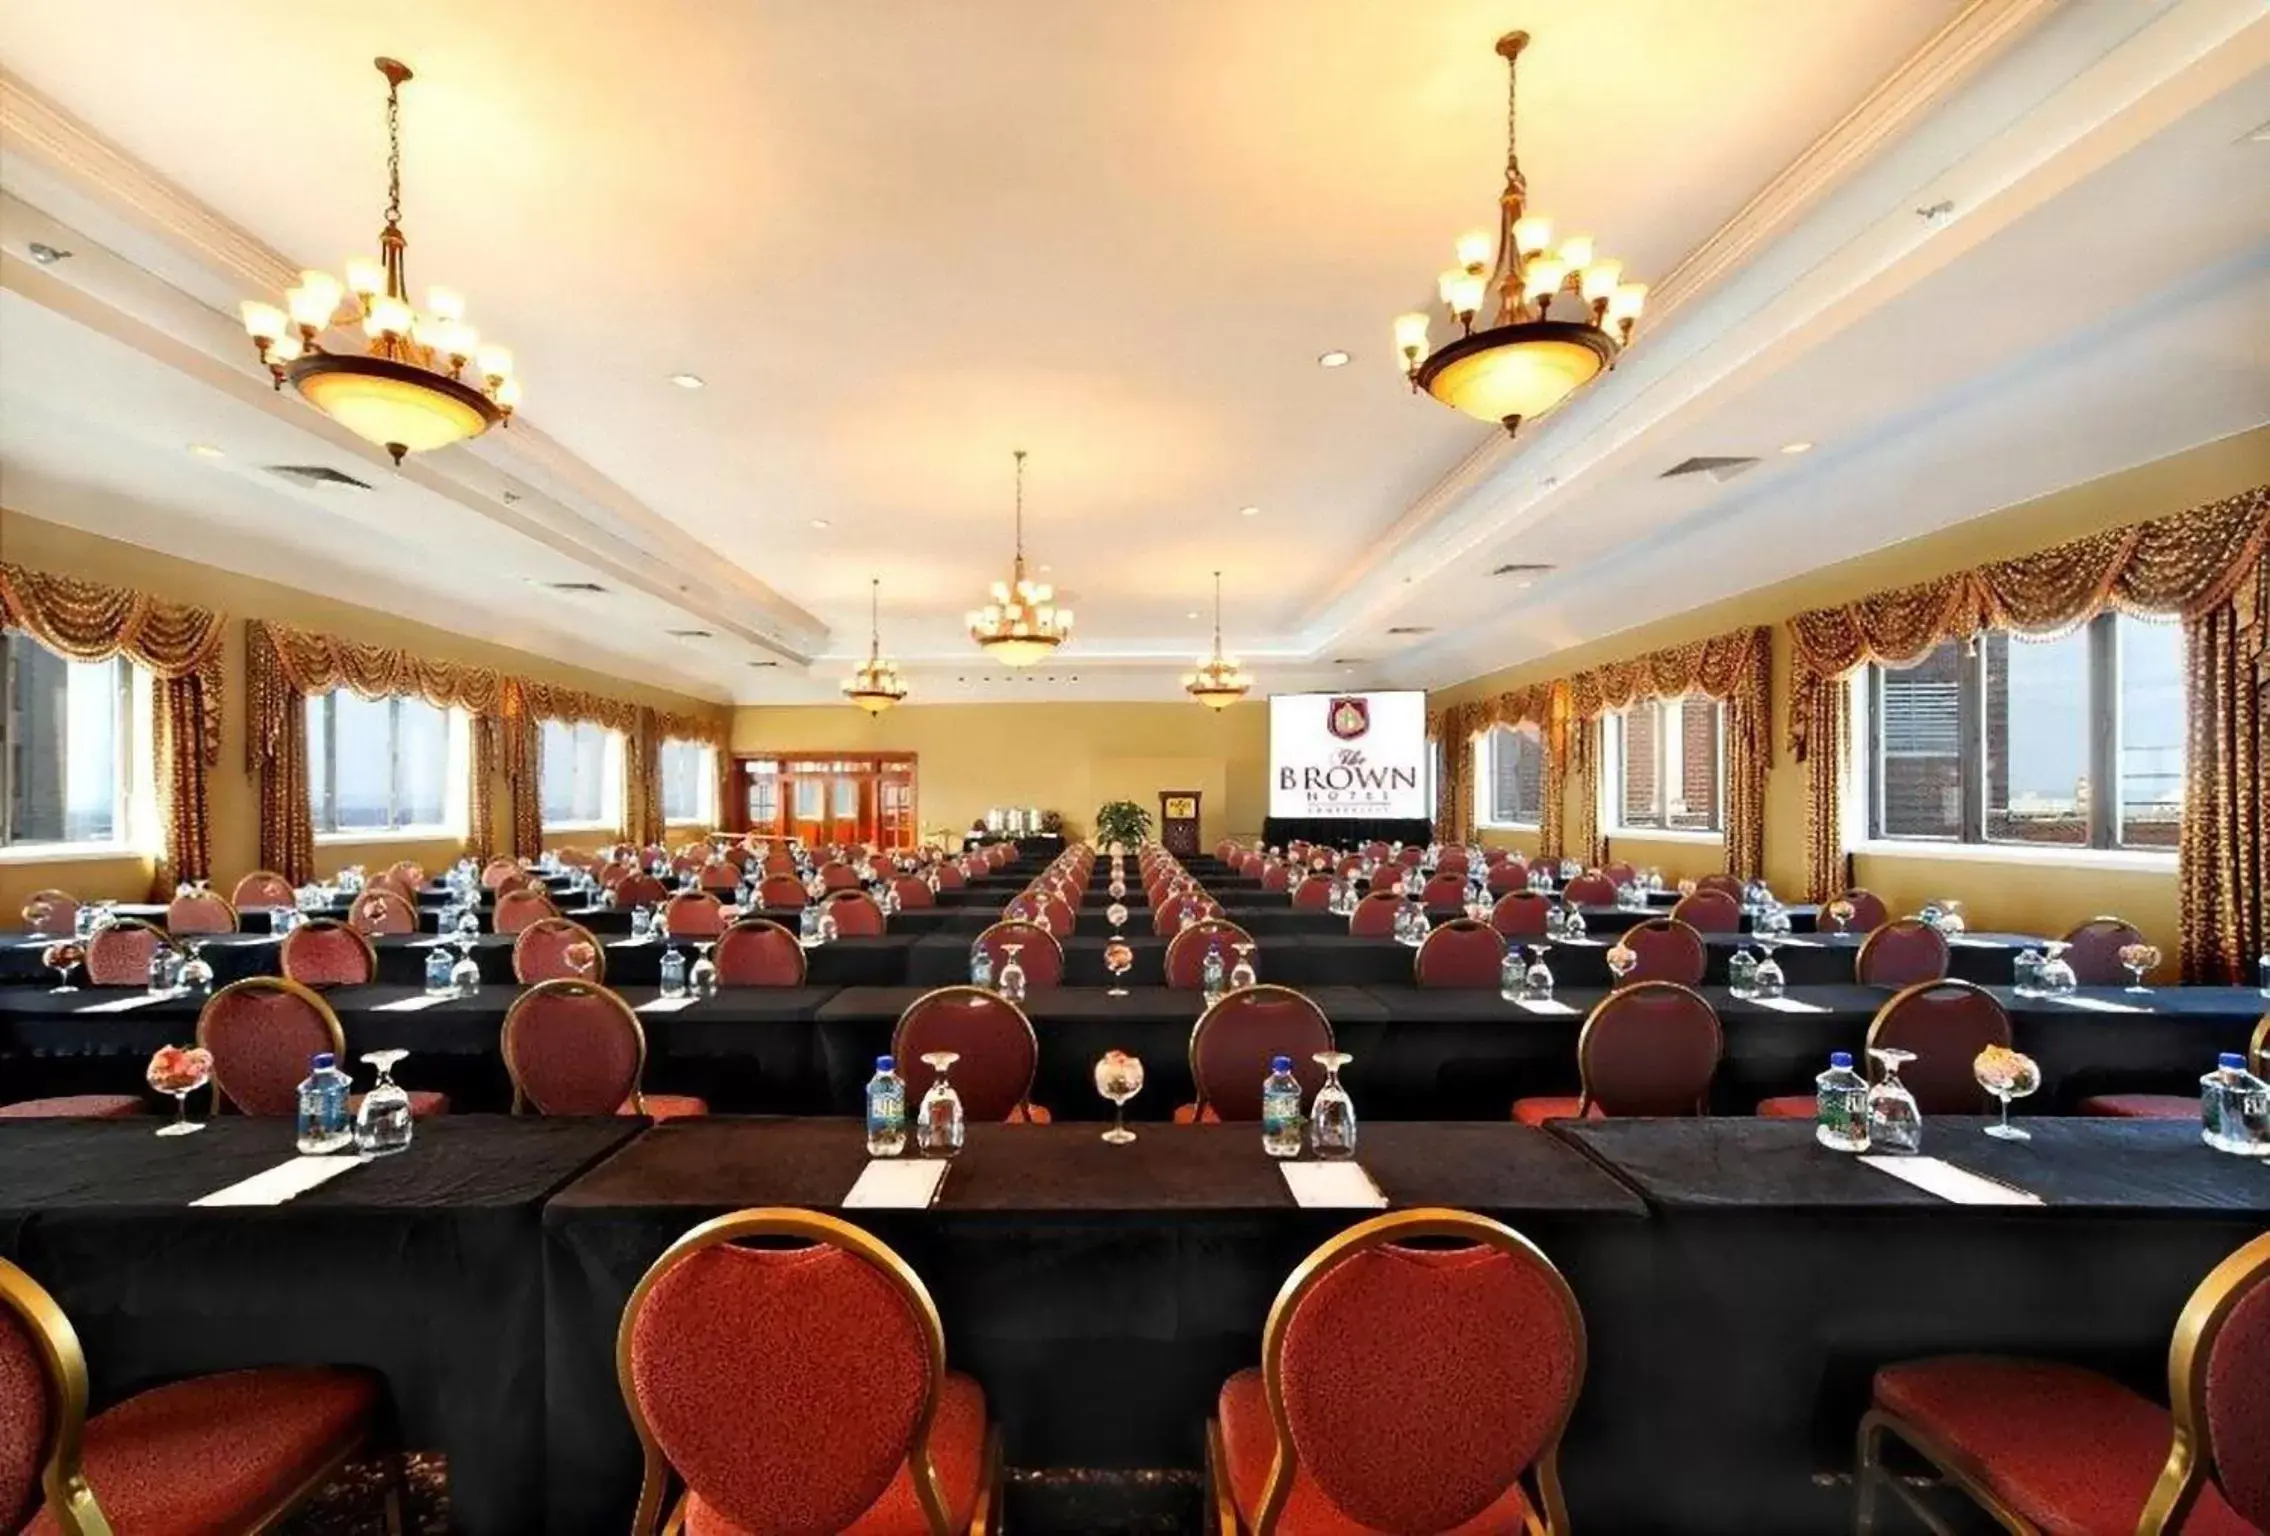 Banquet/Function facilities, Banquet Facilities in The Brown Hotel